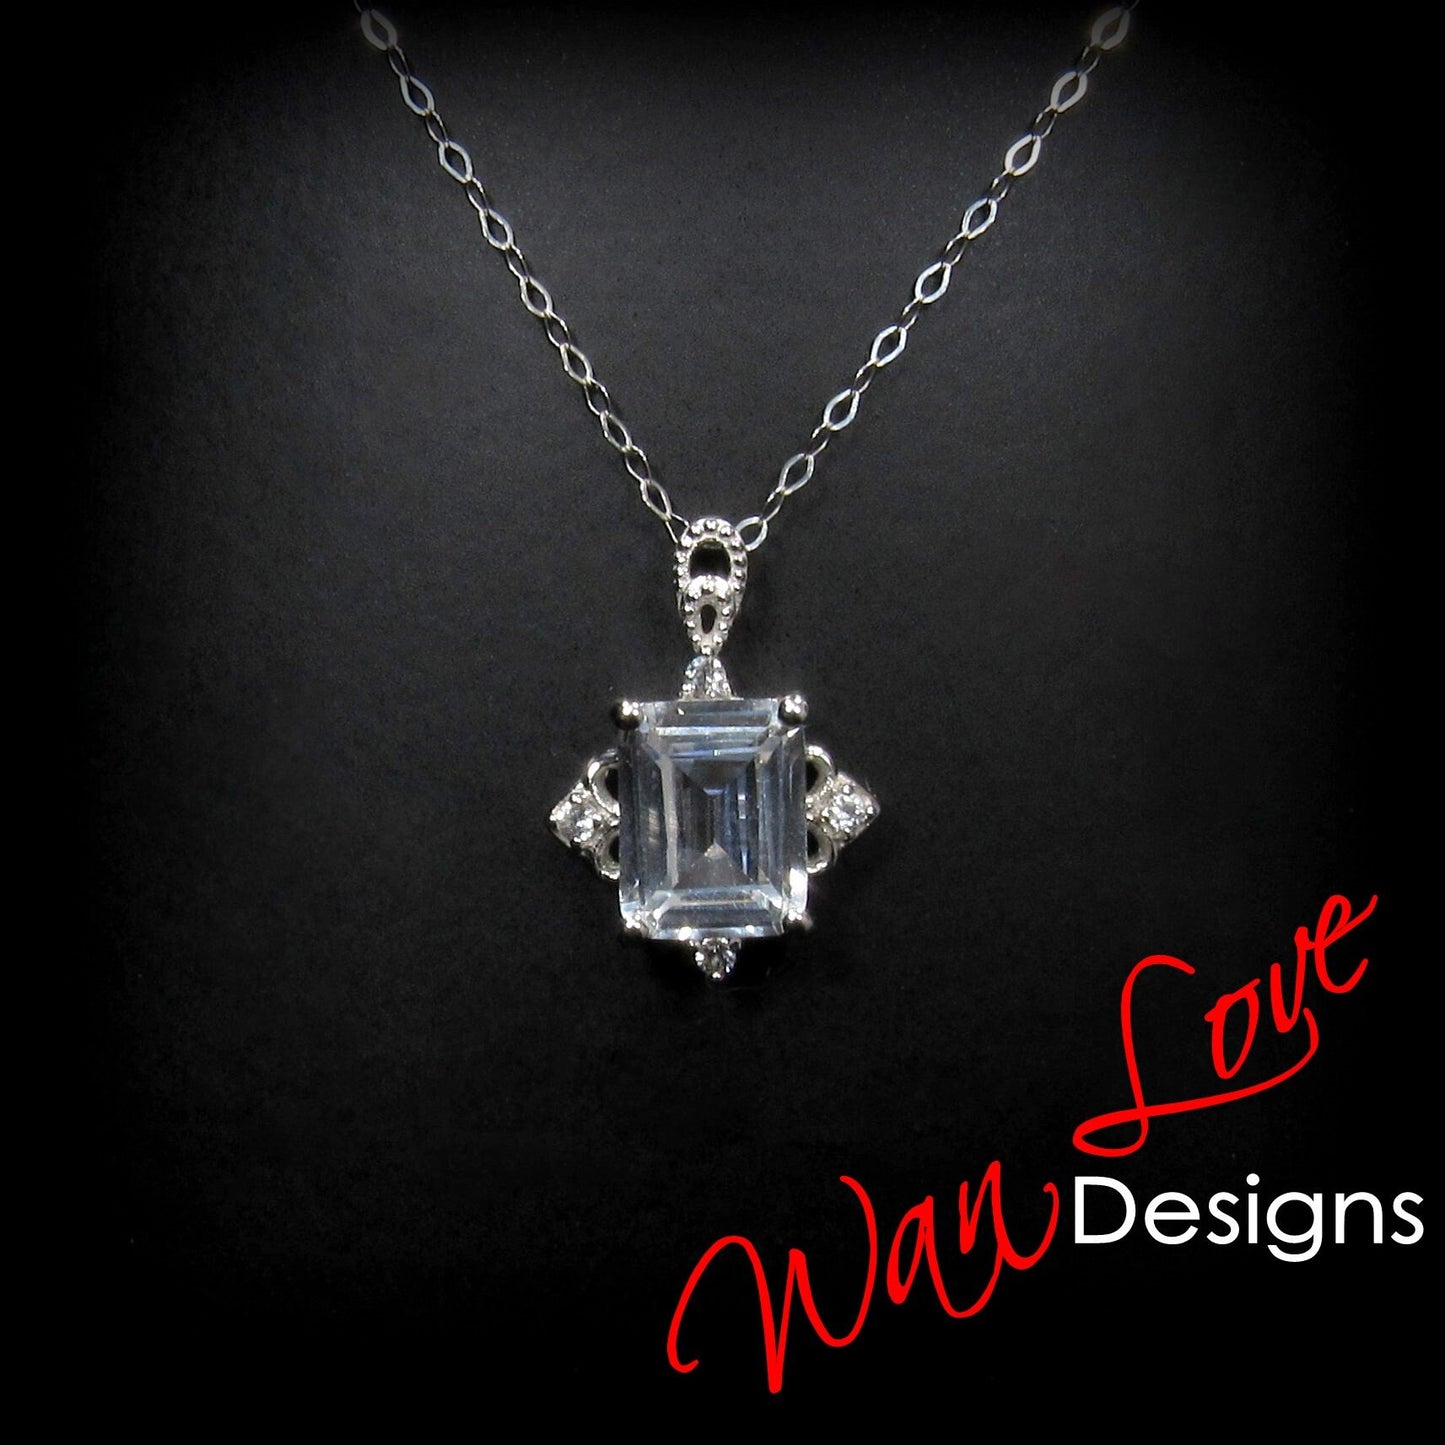 White Sapphire Emerald Antique Vintage Style Ornate Pendant Necklace 4ct 10x8mmm Custom Rose or White Gold Anniversary Gift Ready to Ship